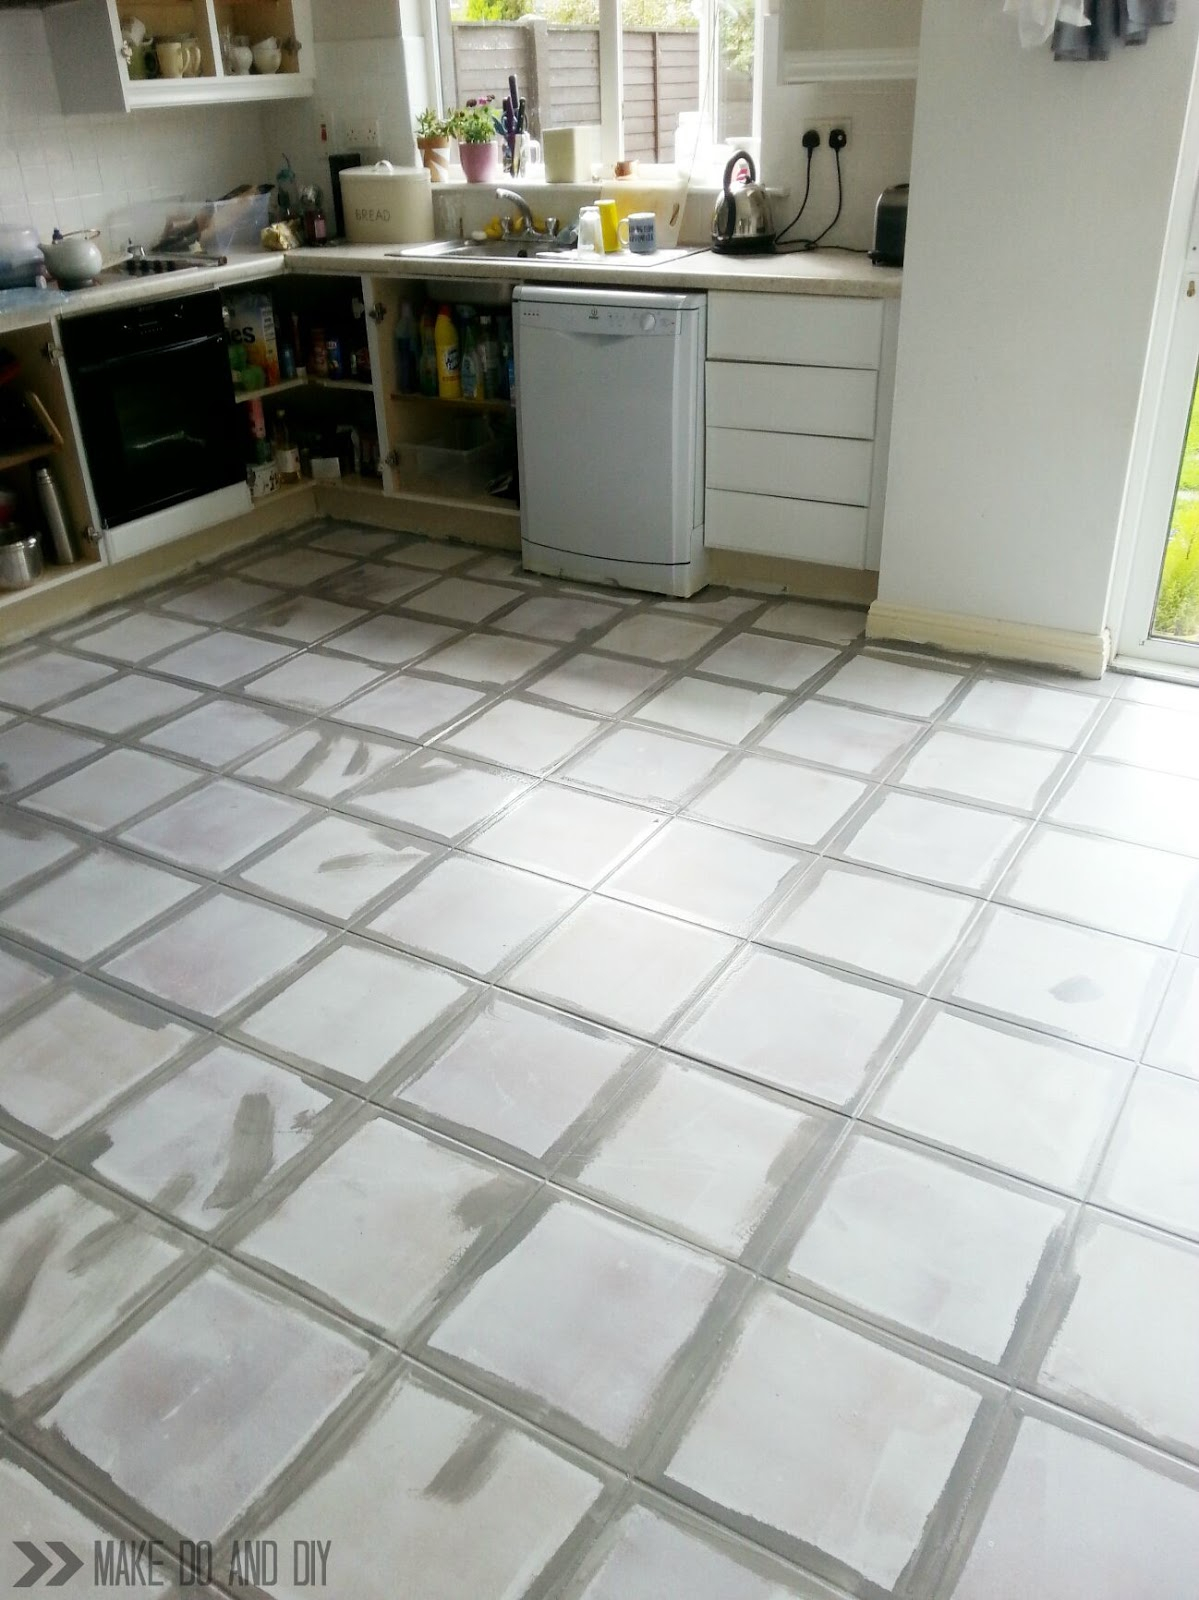 Painted Tile Floor No Really Make Do And Diy with regard to size 1199 X 1600